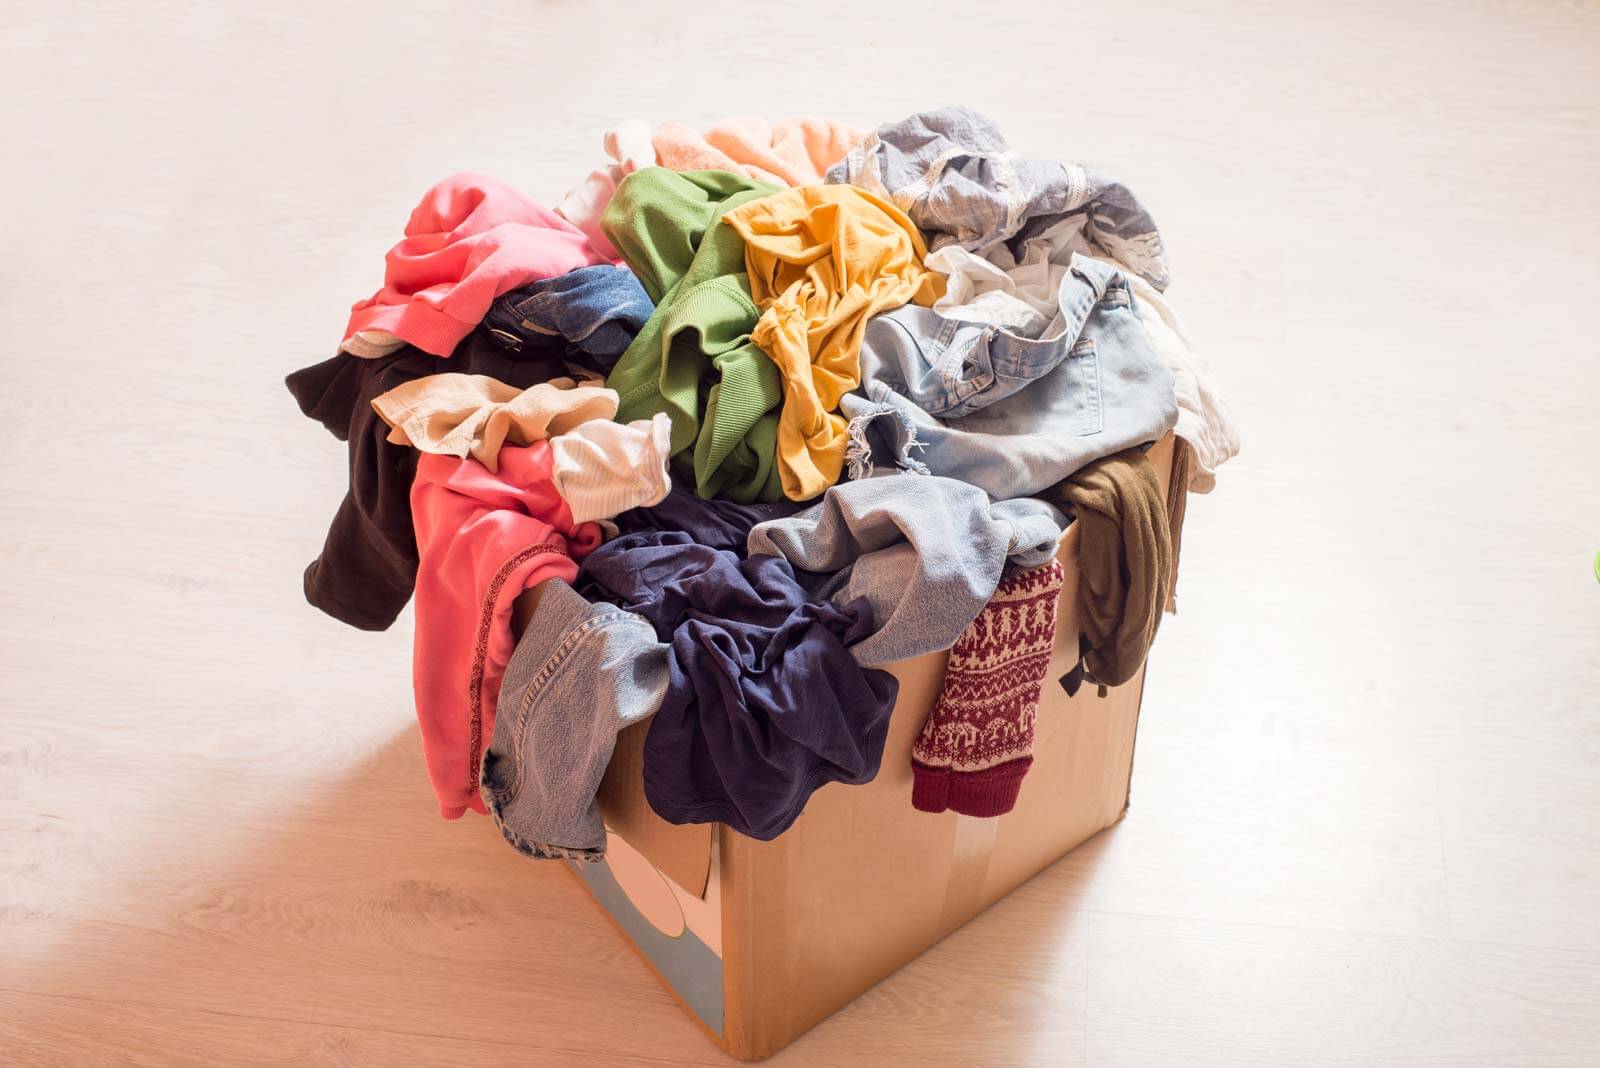 cardboard box full of discarded clothes needing motivation for decluttering